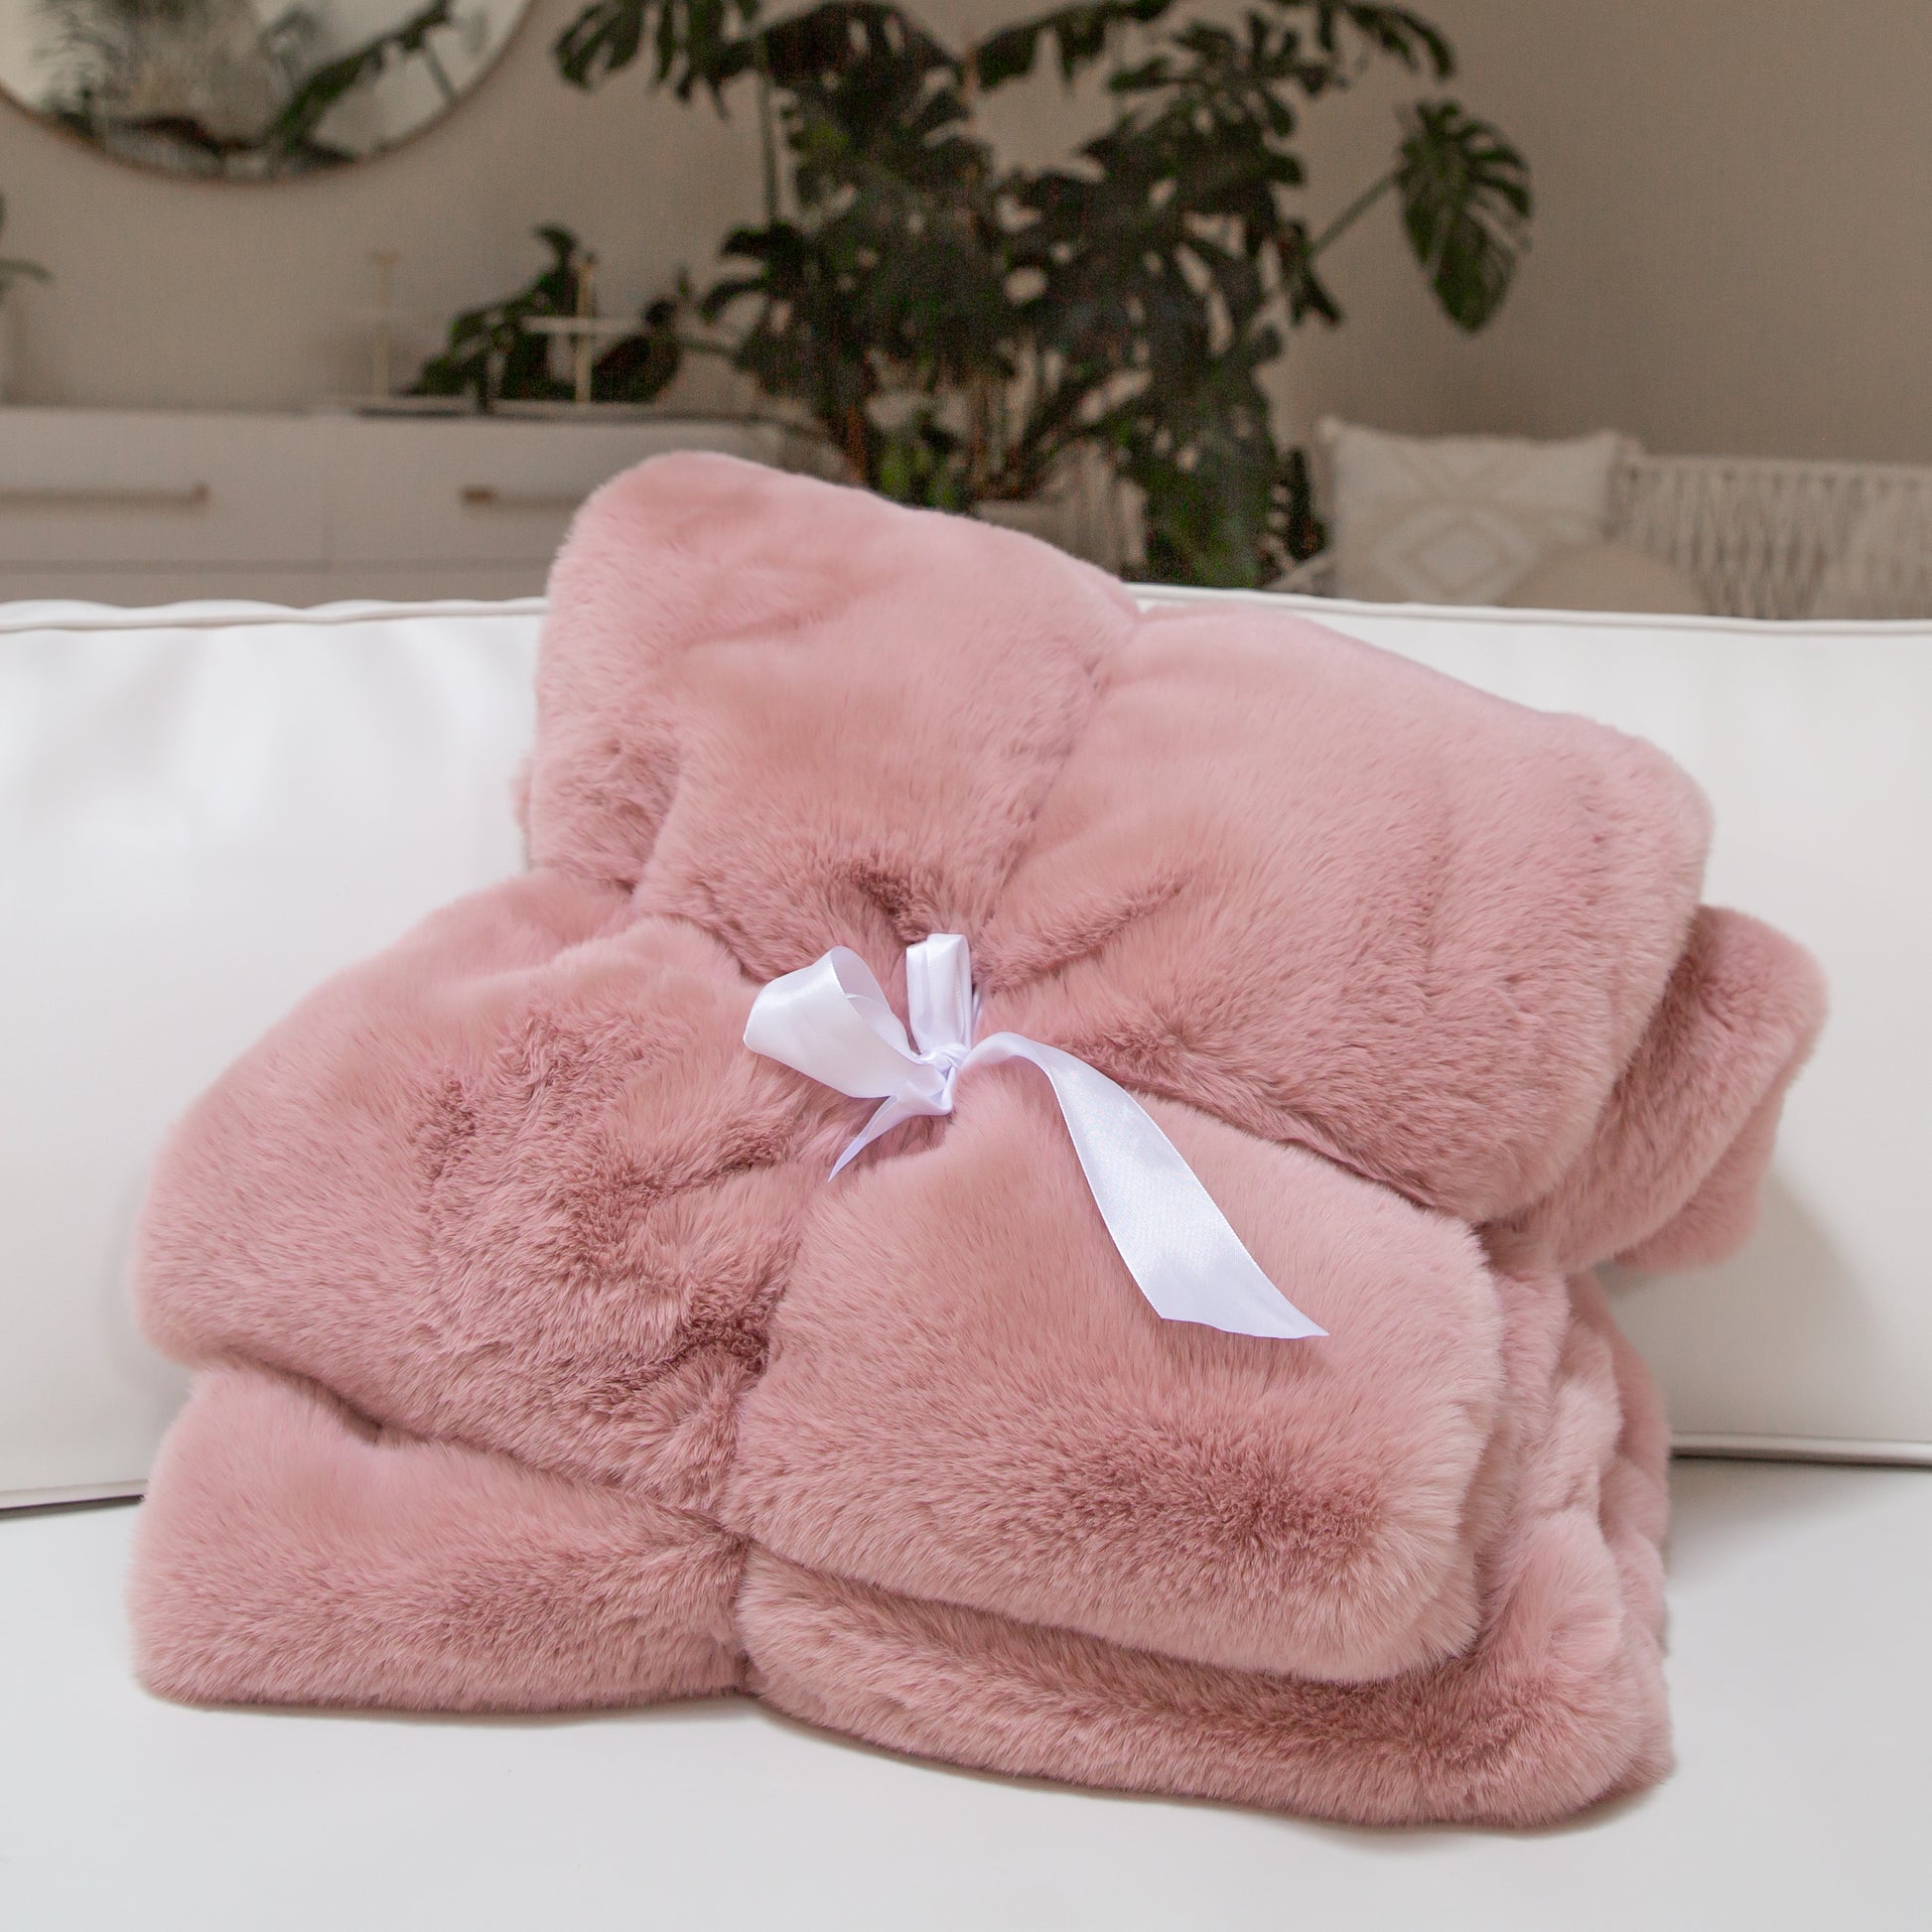 On a tan background is a dusty rose faux fur throw blanket folded with a white satin bow in the center. 